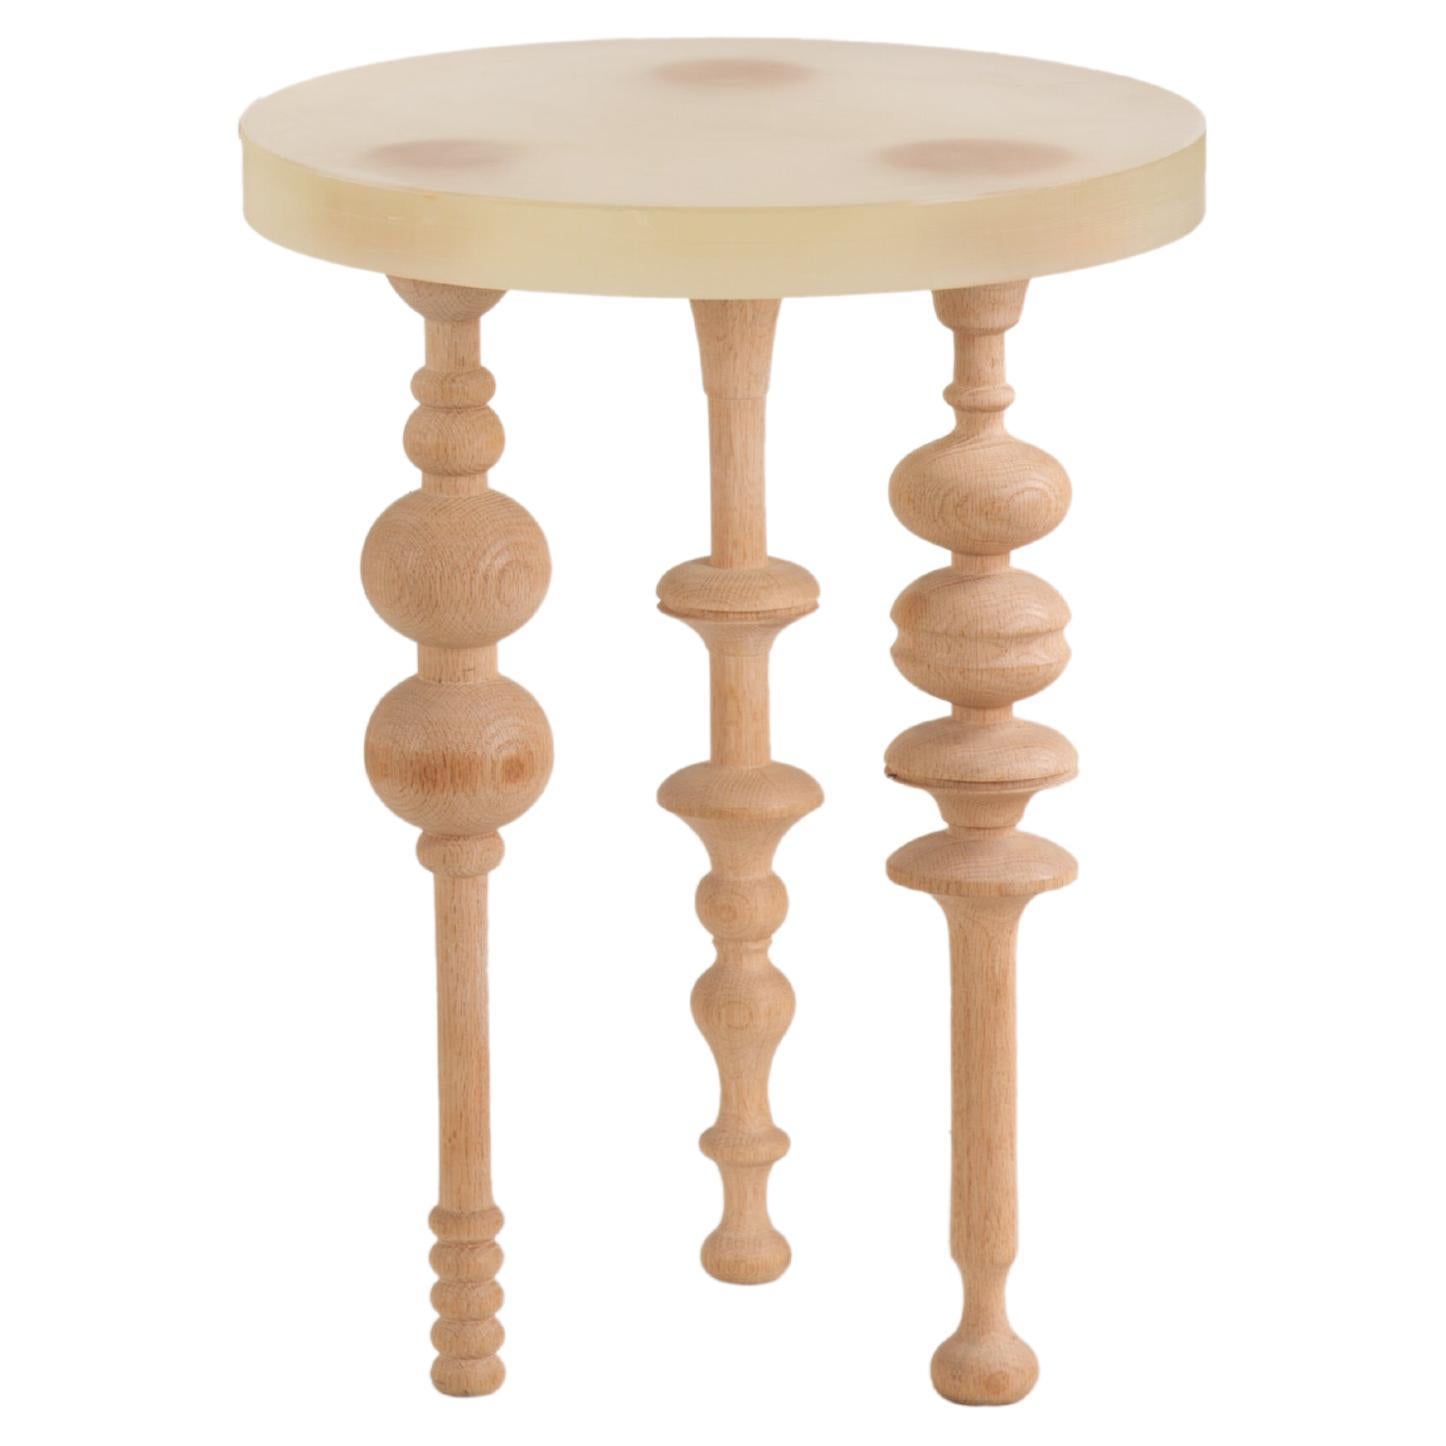 Arabesque-Inspired Oak Wood Side Table with Resin Top - Large